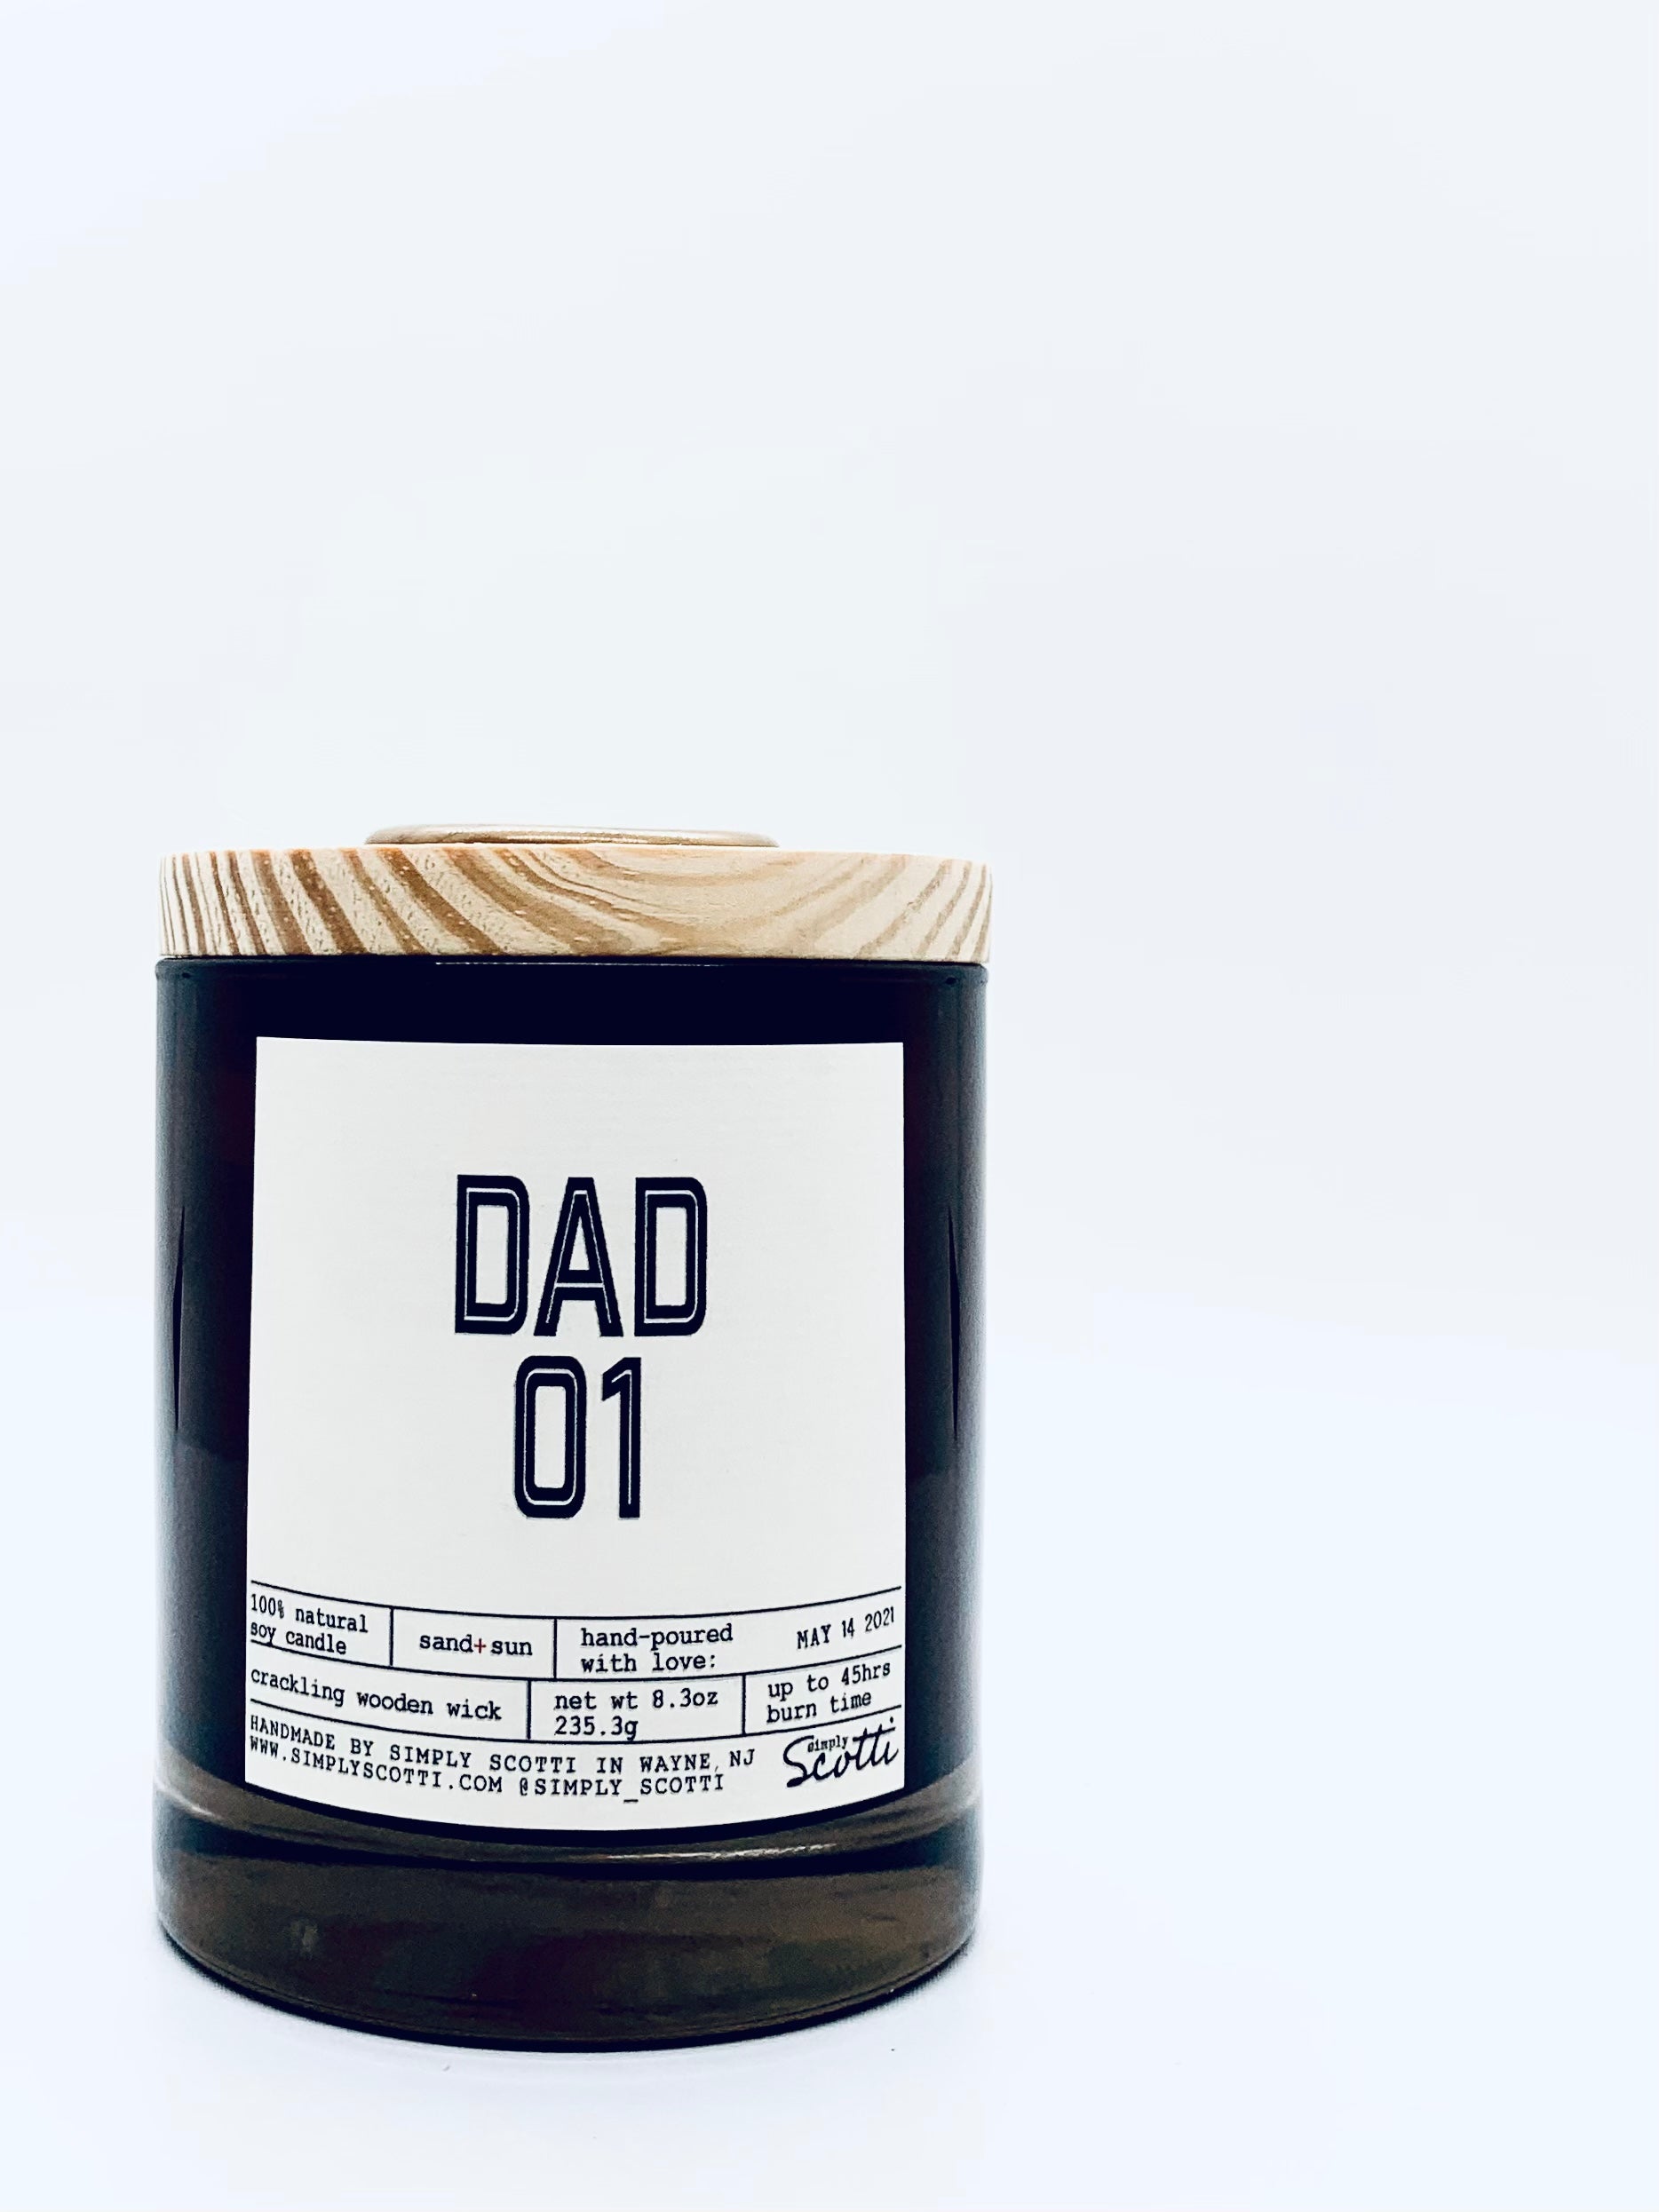 DAD 01 Candle